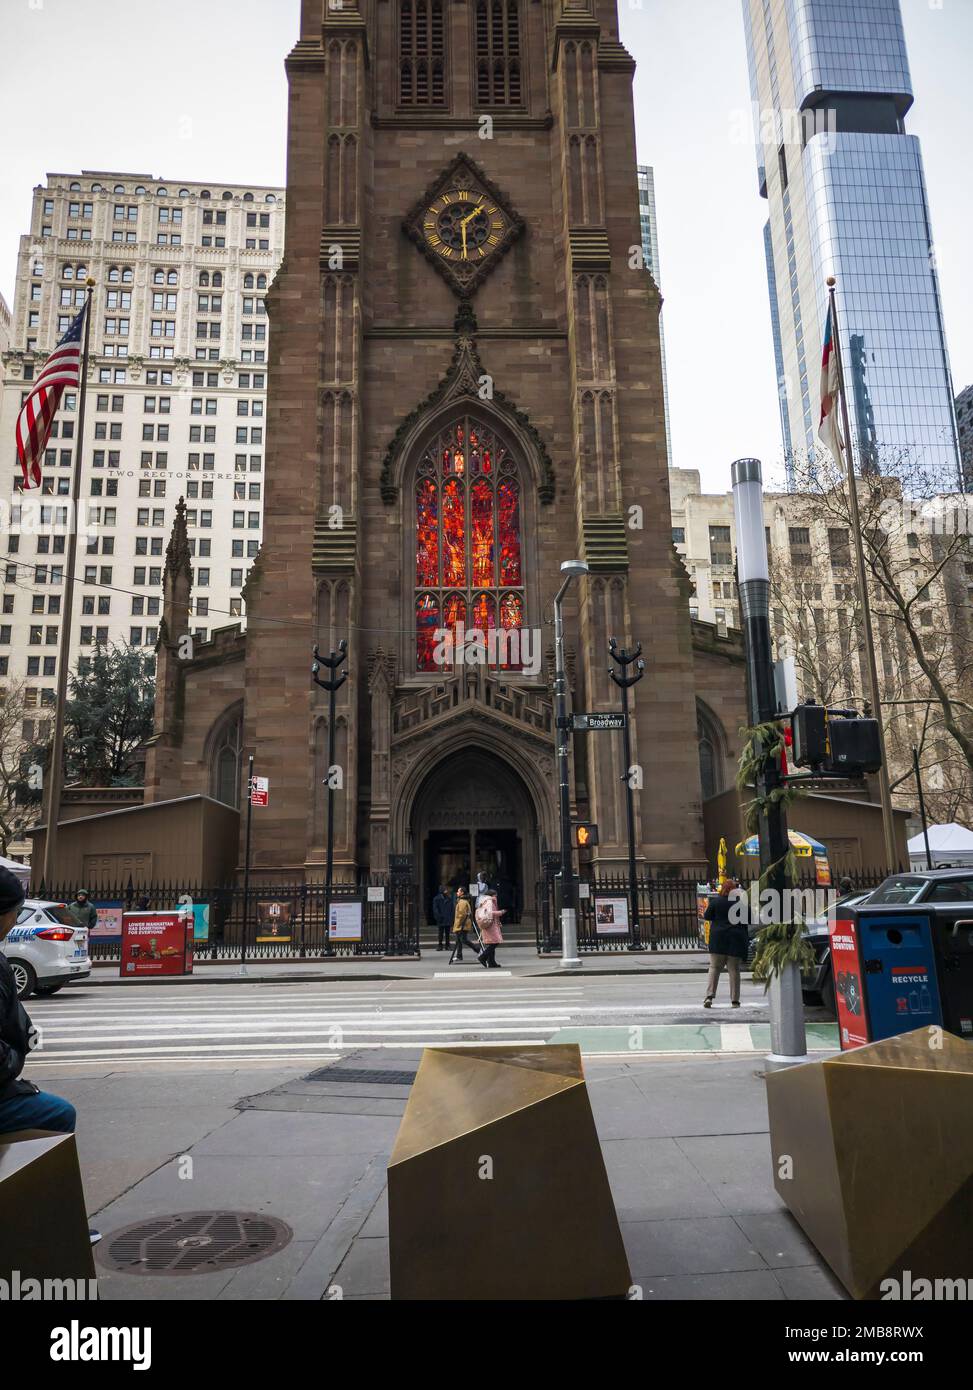 The stained glass in Trinity Church in the Financial District of New York, where Alexander Hamilton is buried, is seen illuminated on Wednesday, January 11, 2023. Because of the enduring success of the musical 'Hamilton' on Broadway, sites associated with him still see an increase in interest and tourist traffic. (© Richard B. Levine) Stock Photo